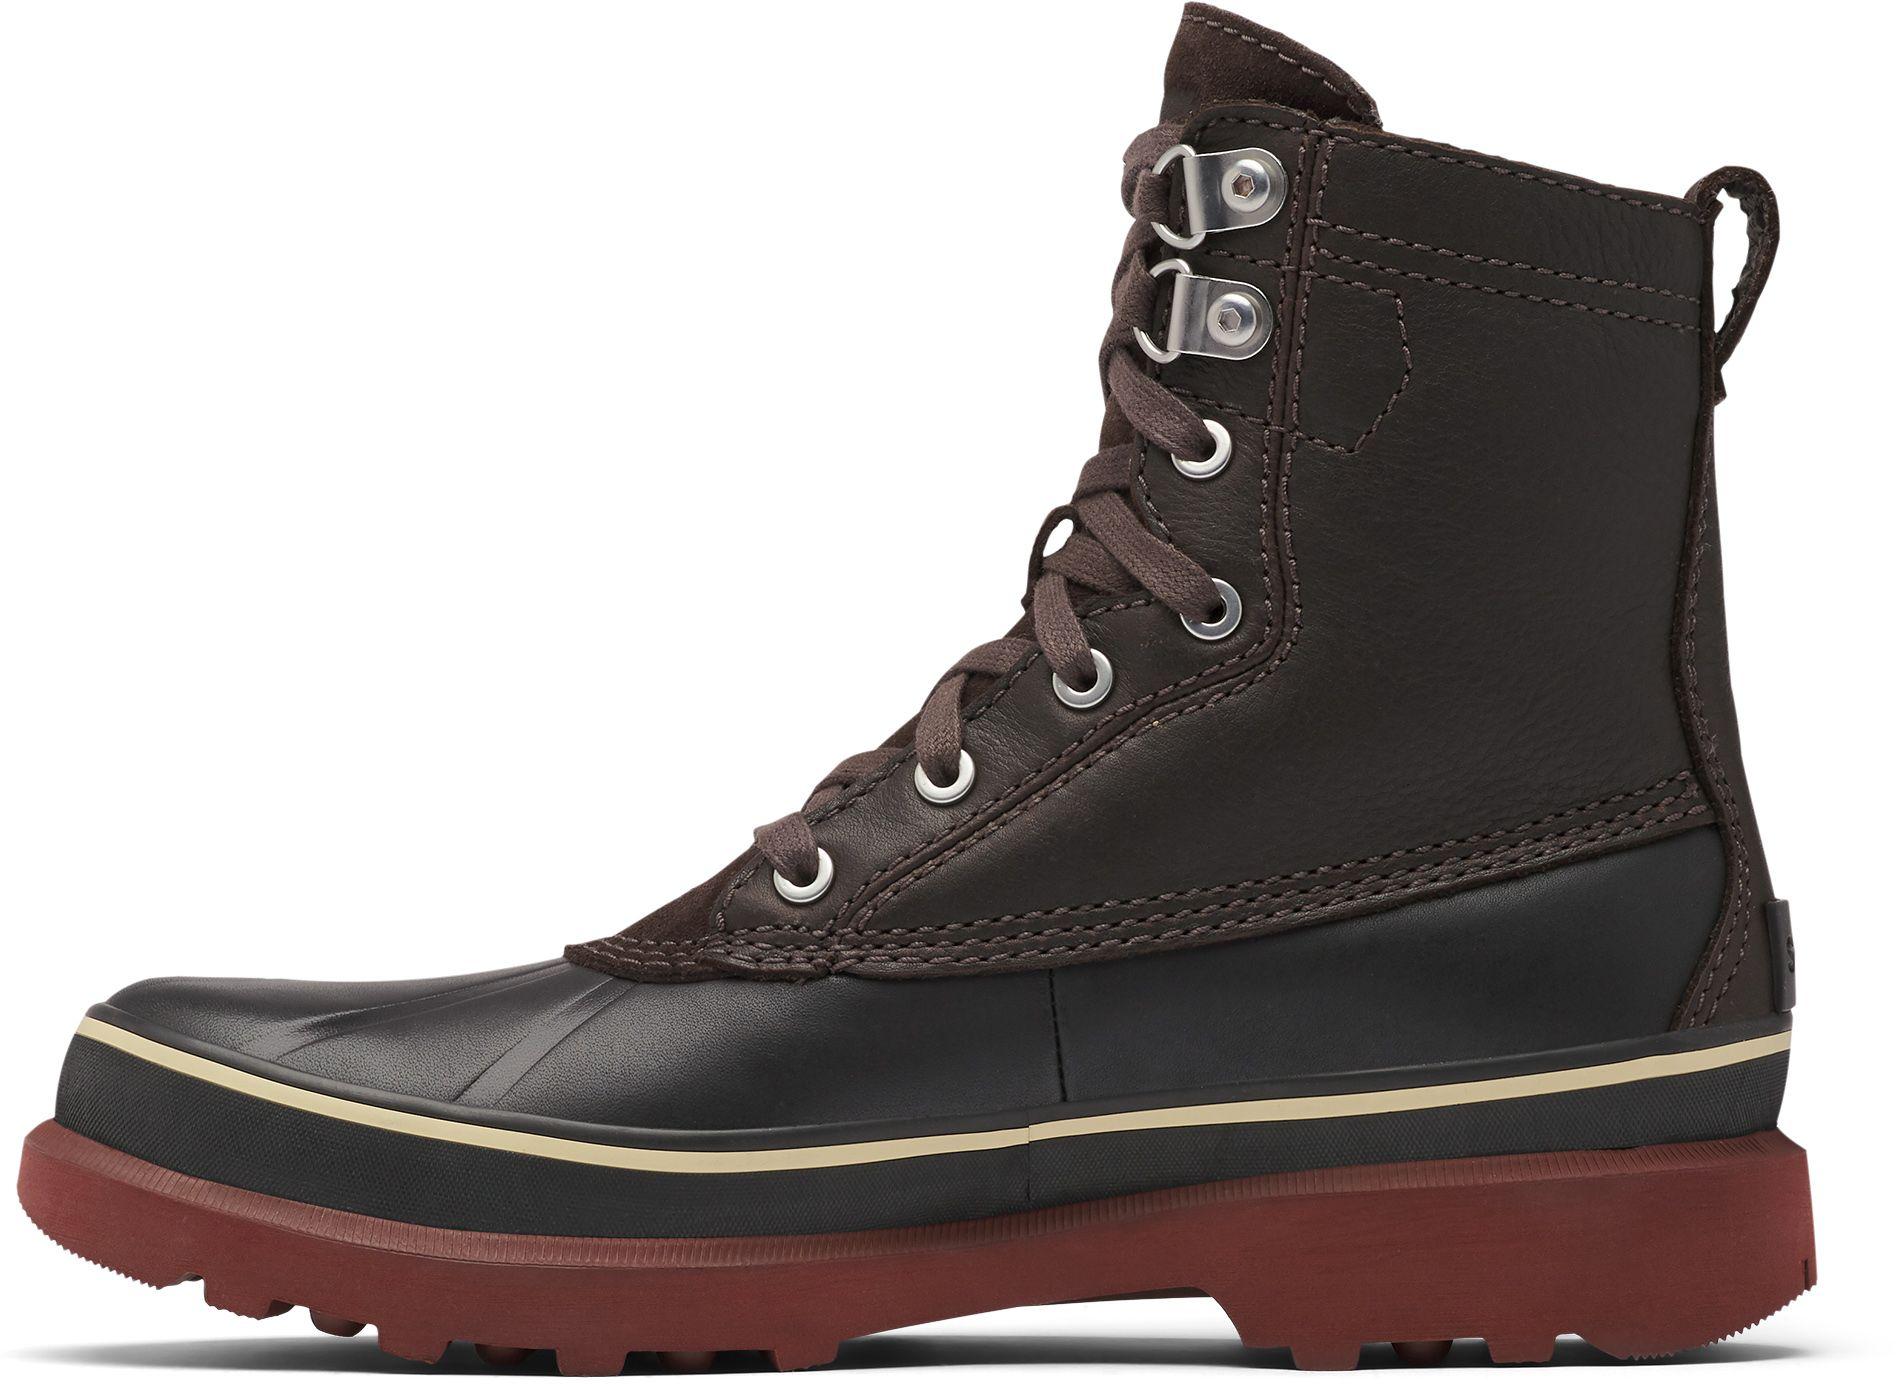 Sorel Caribou Storm Waterproof Casual Boots in Brown for Men - Lyst